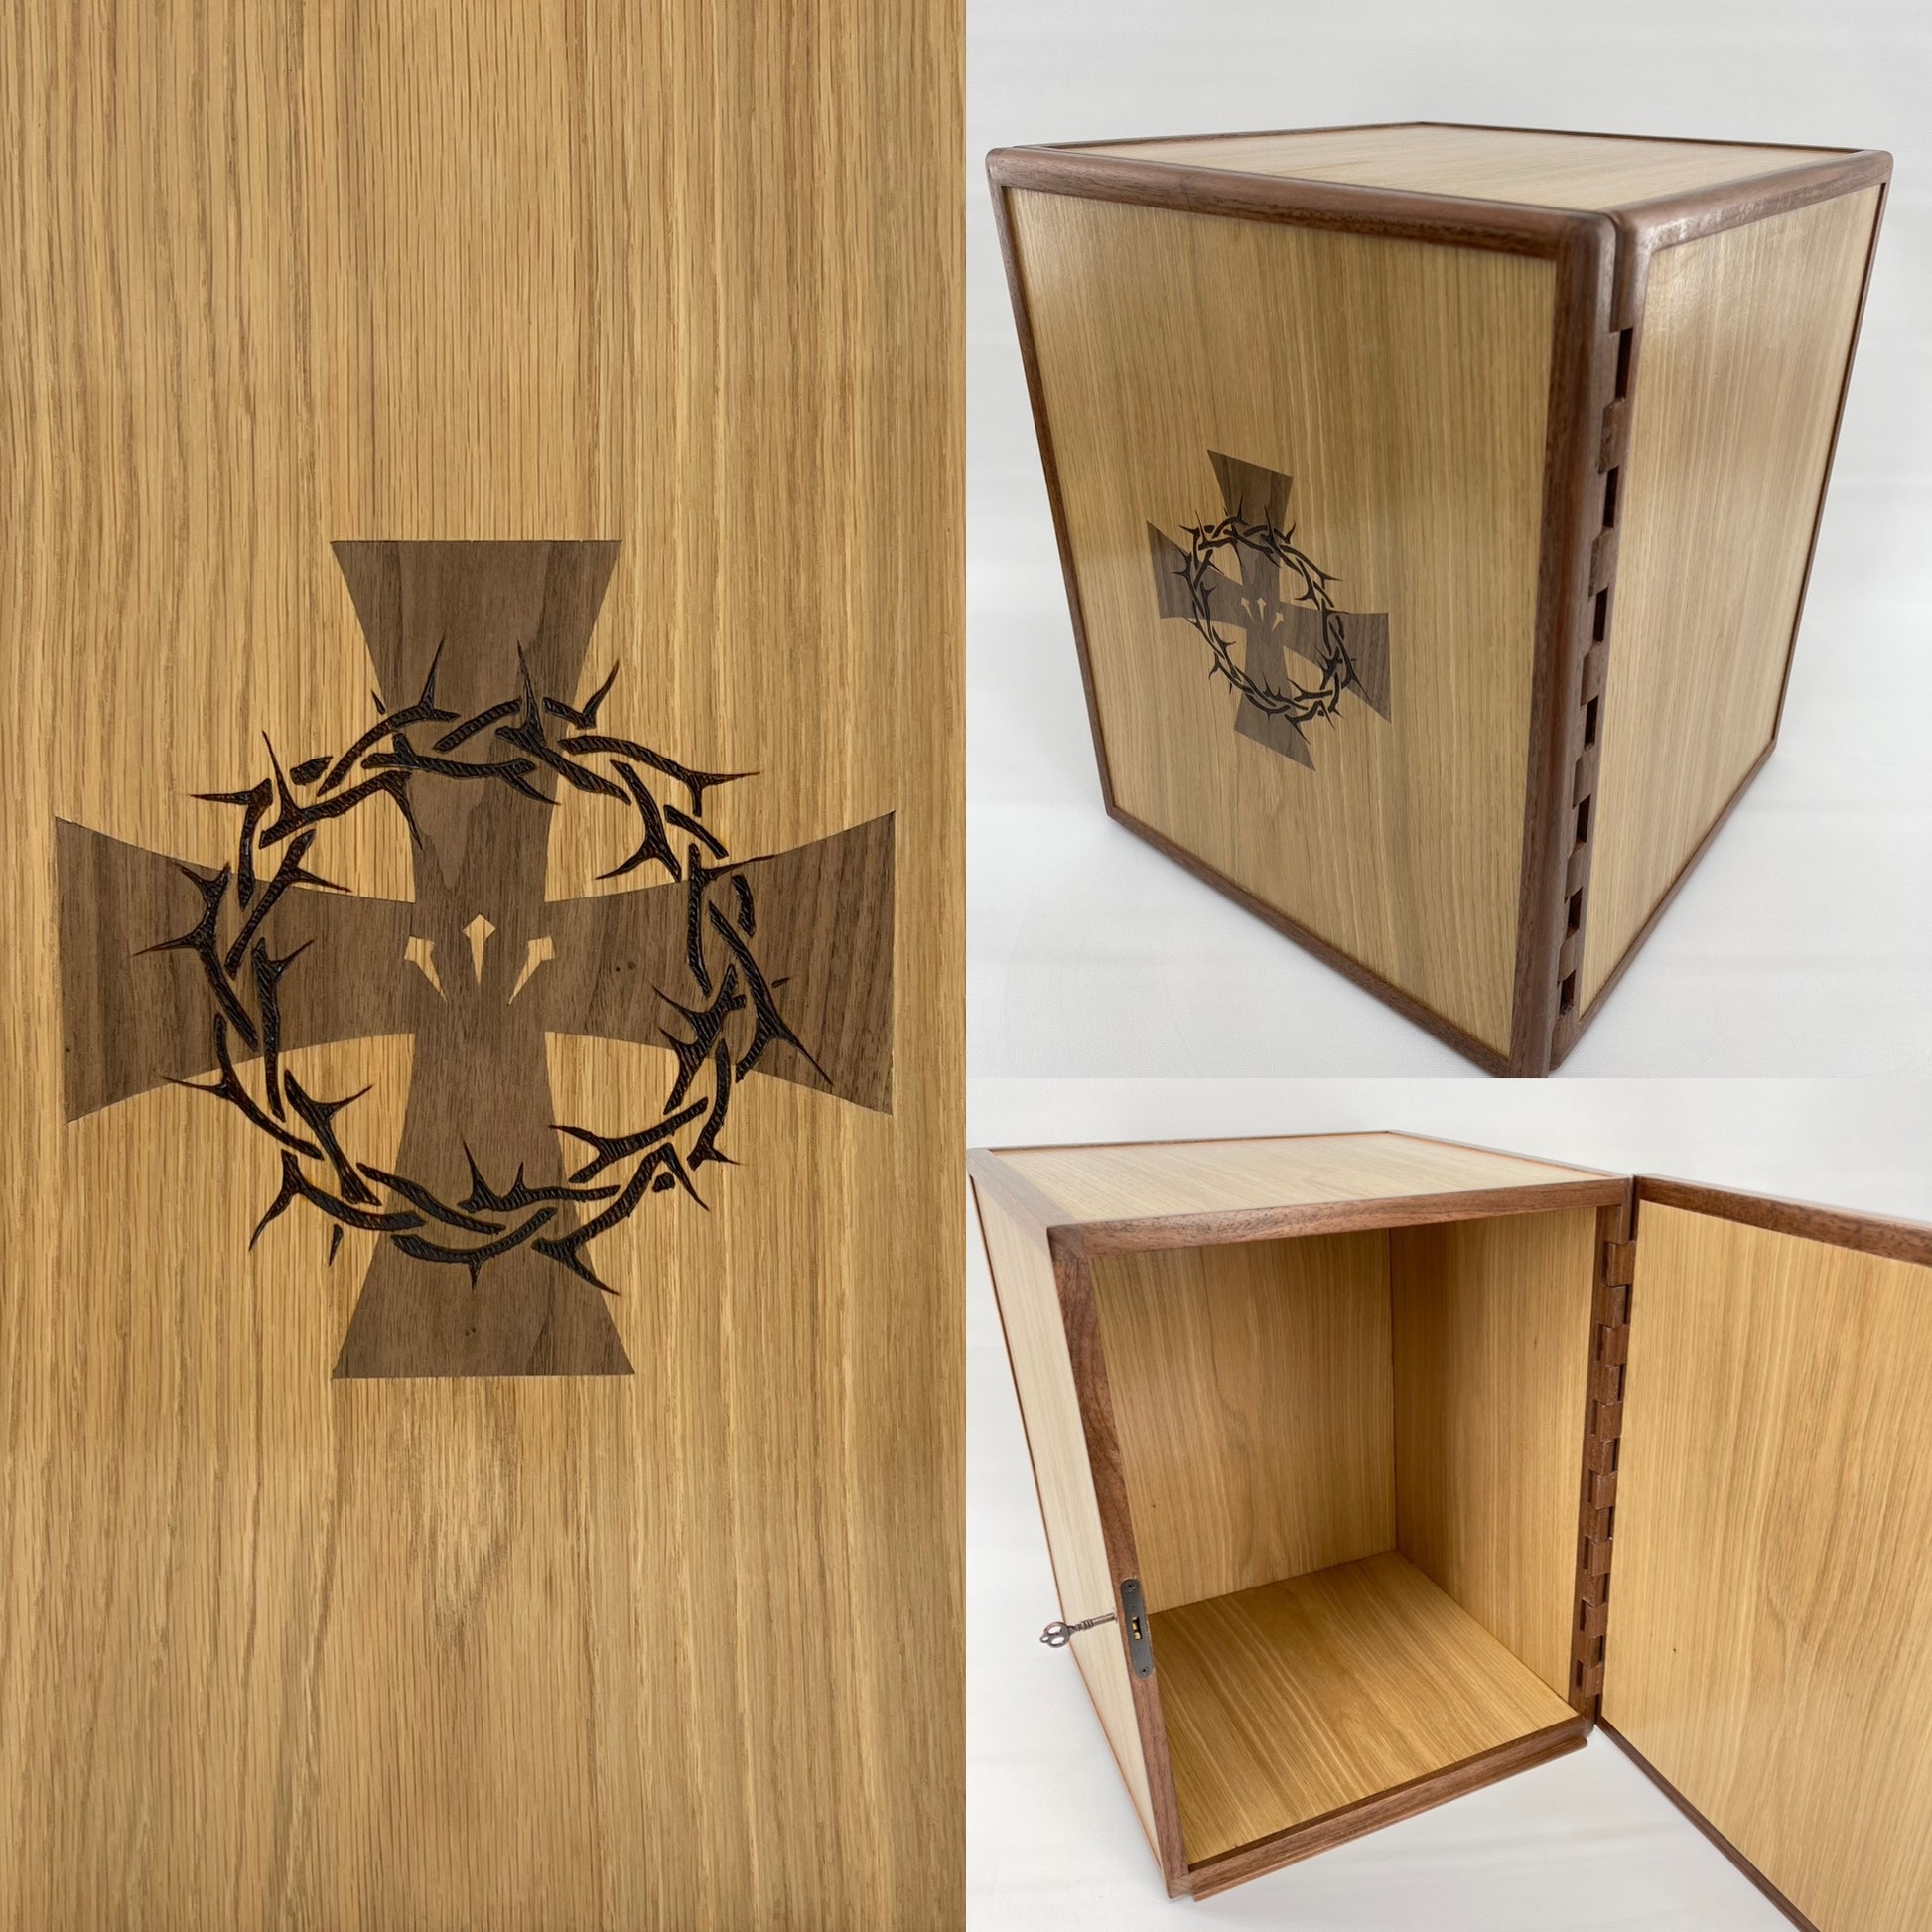 Wooden Tabernacle<p><h5><span style="color: #2b00ff;">(Base price shown) - TreeToBox